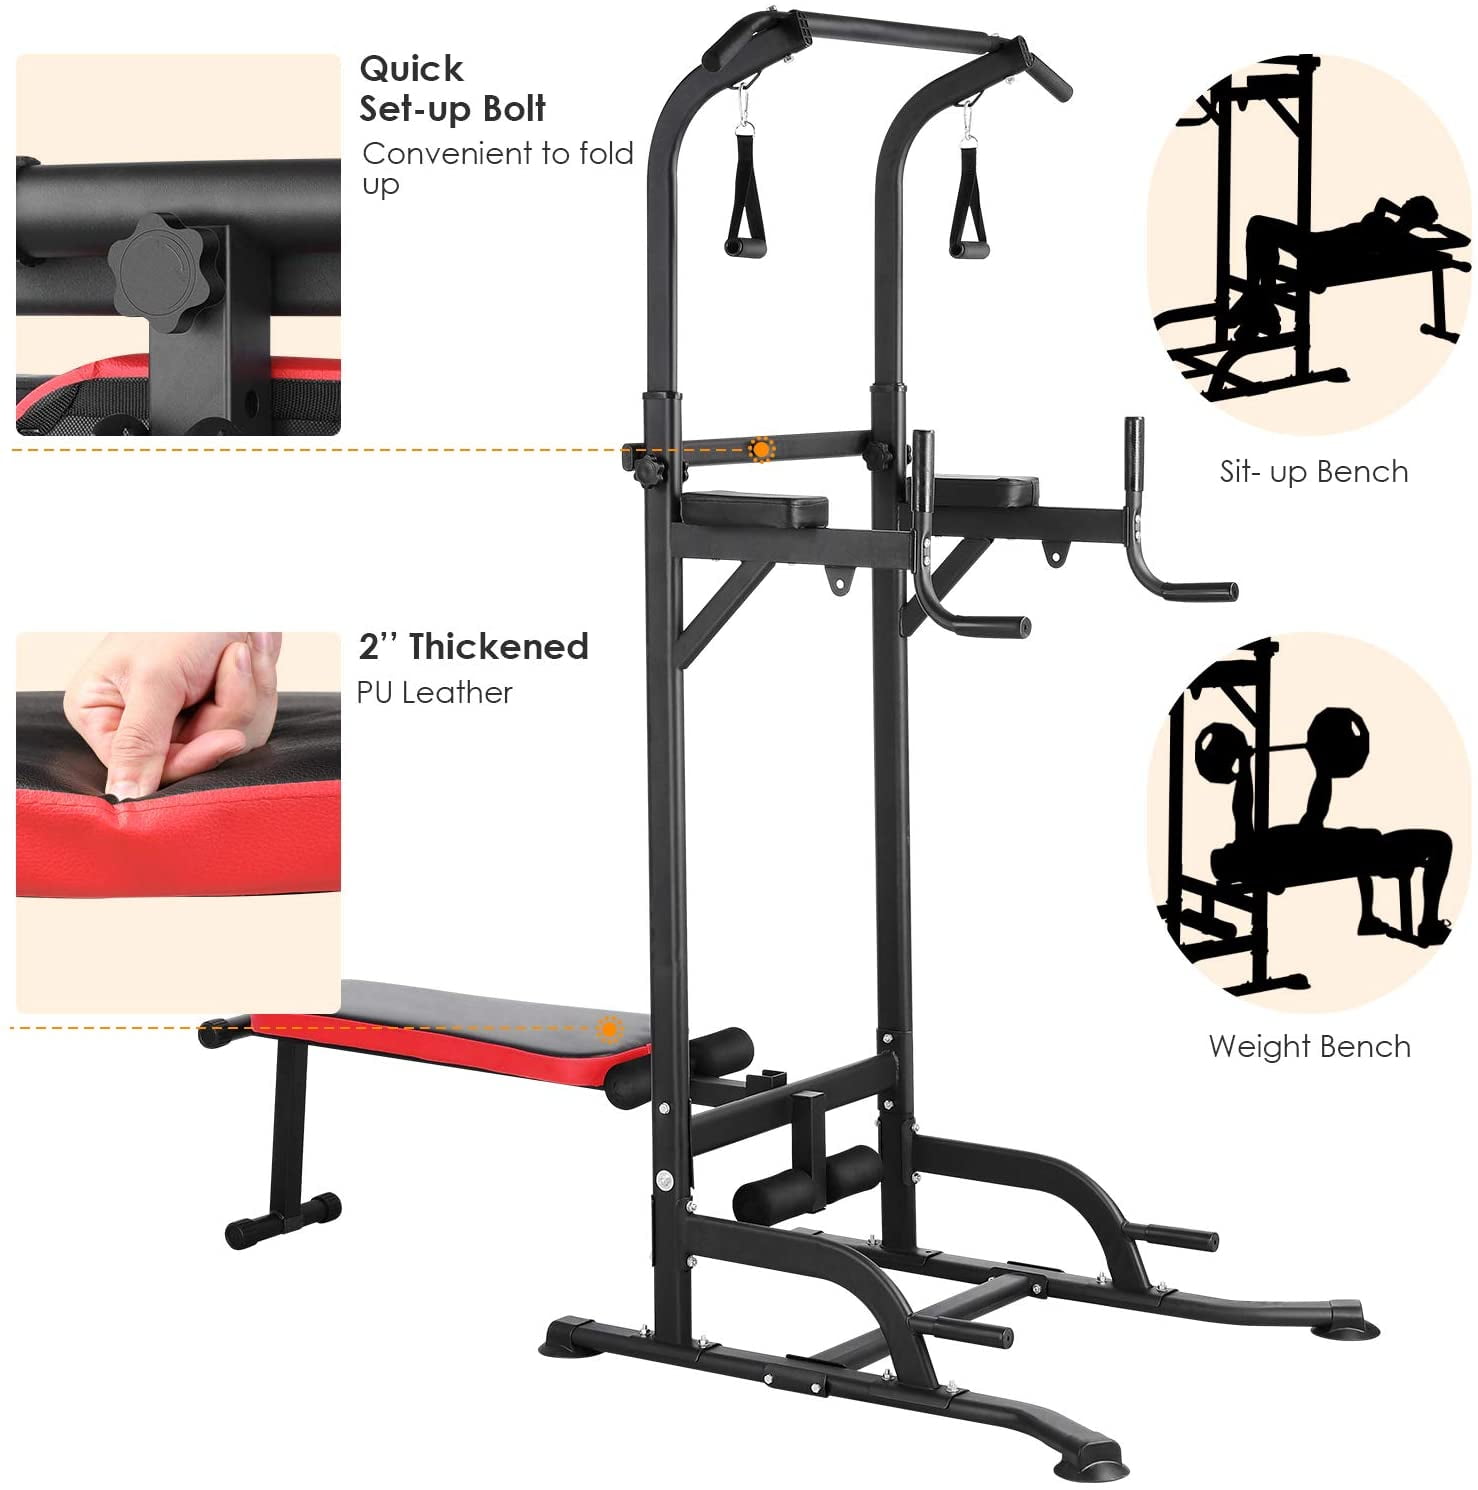 Cethrio Height Adjustable Power Tower With Sit-Up Bench Pull Up Bar Stand/Dip Station For Home Gym Workout Full Body Strength Training 